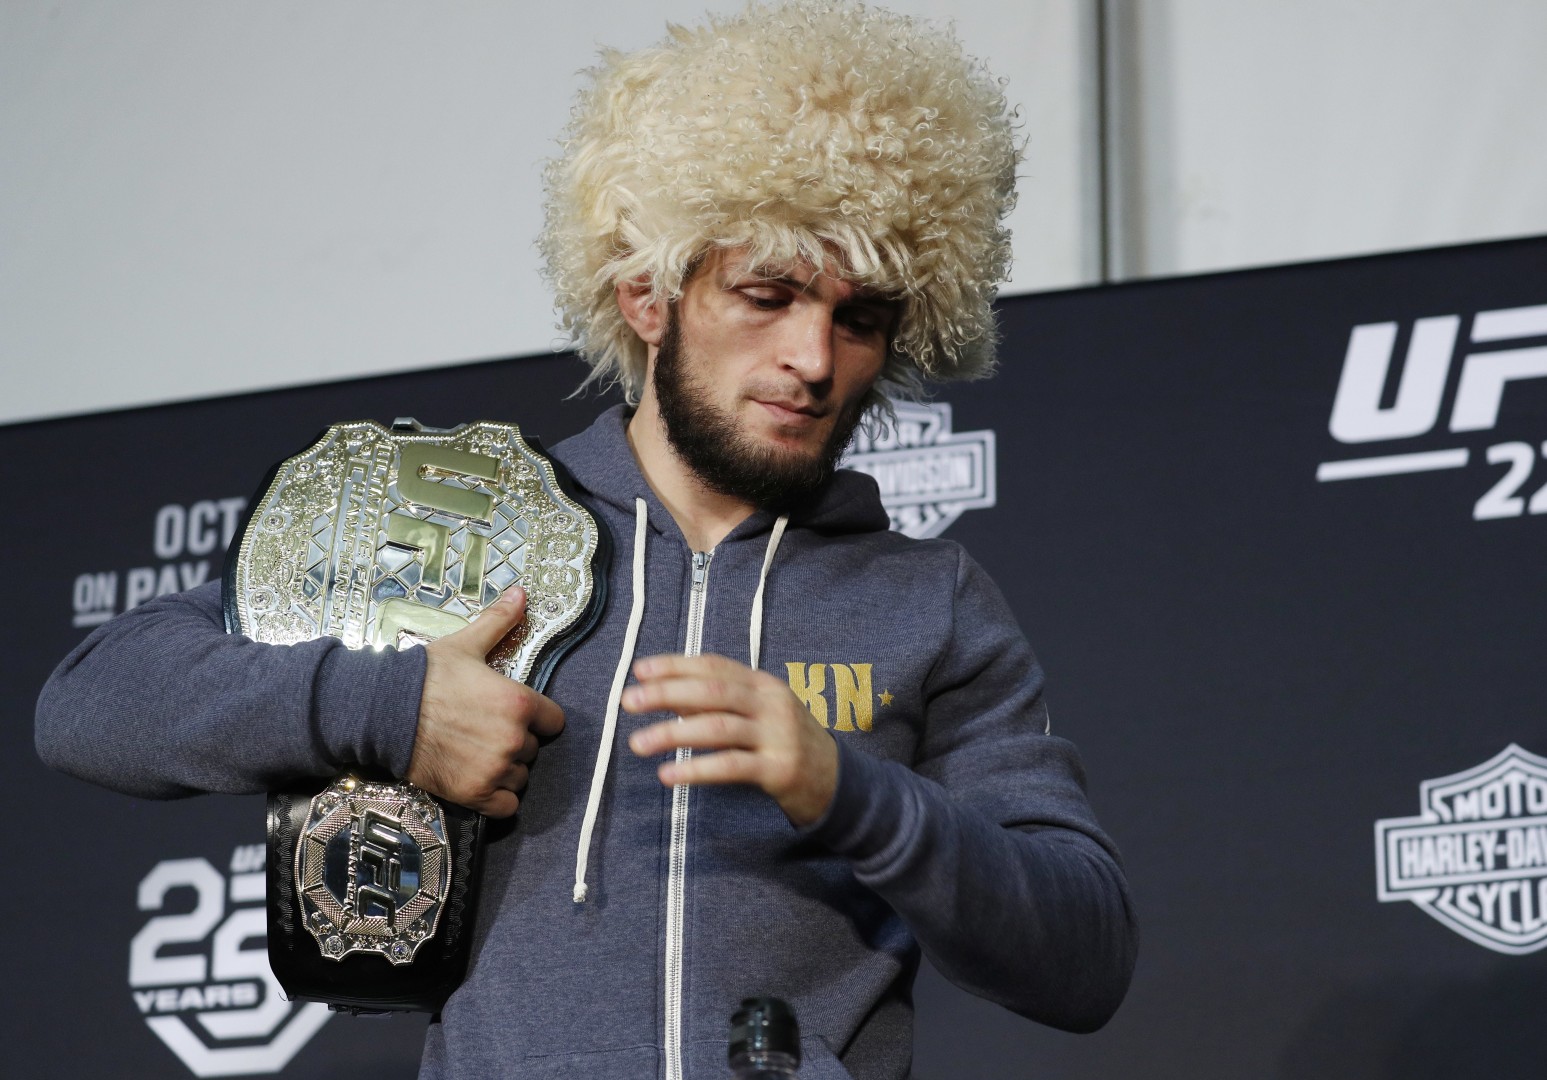 Khabib Instagram Followers - How To Hack Into A Private ... - 1547 x 1080 jpeg 311kB